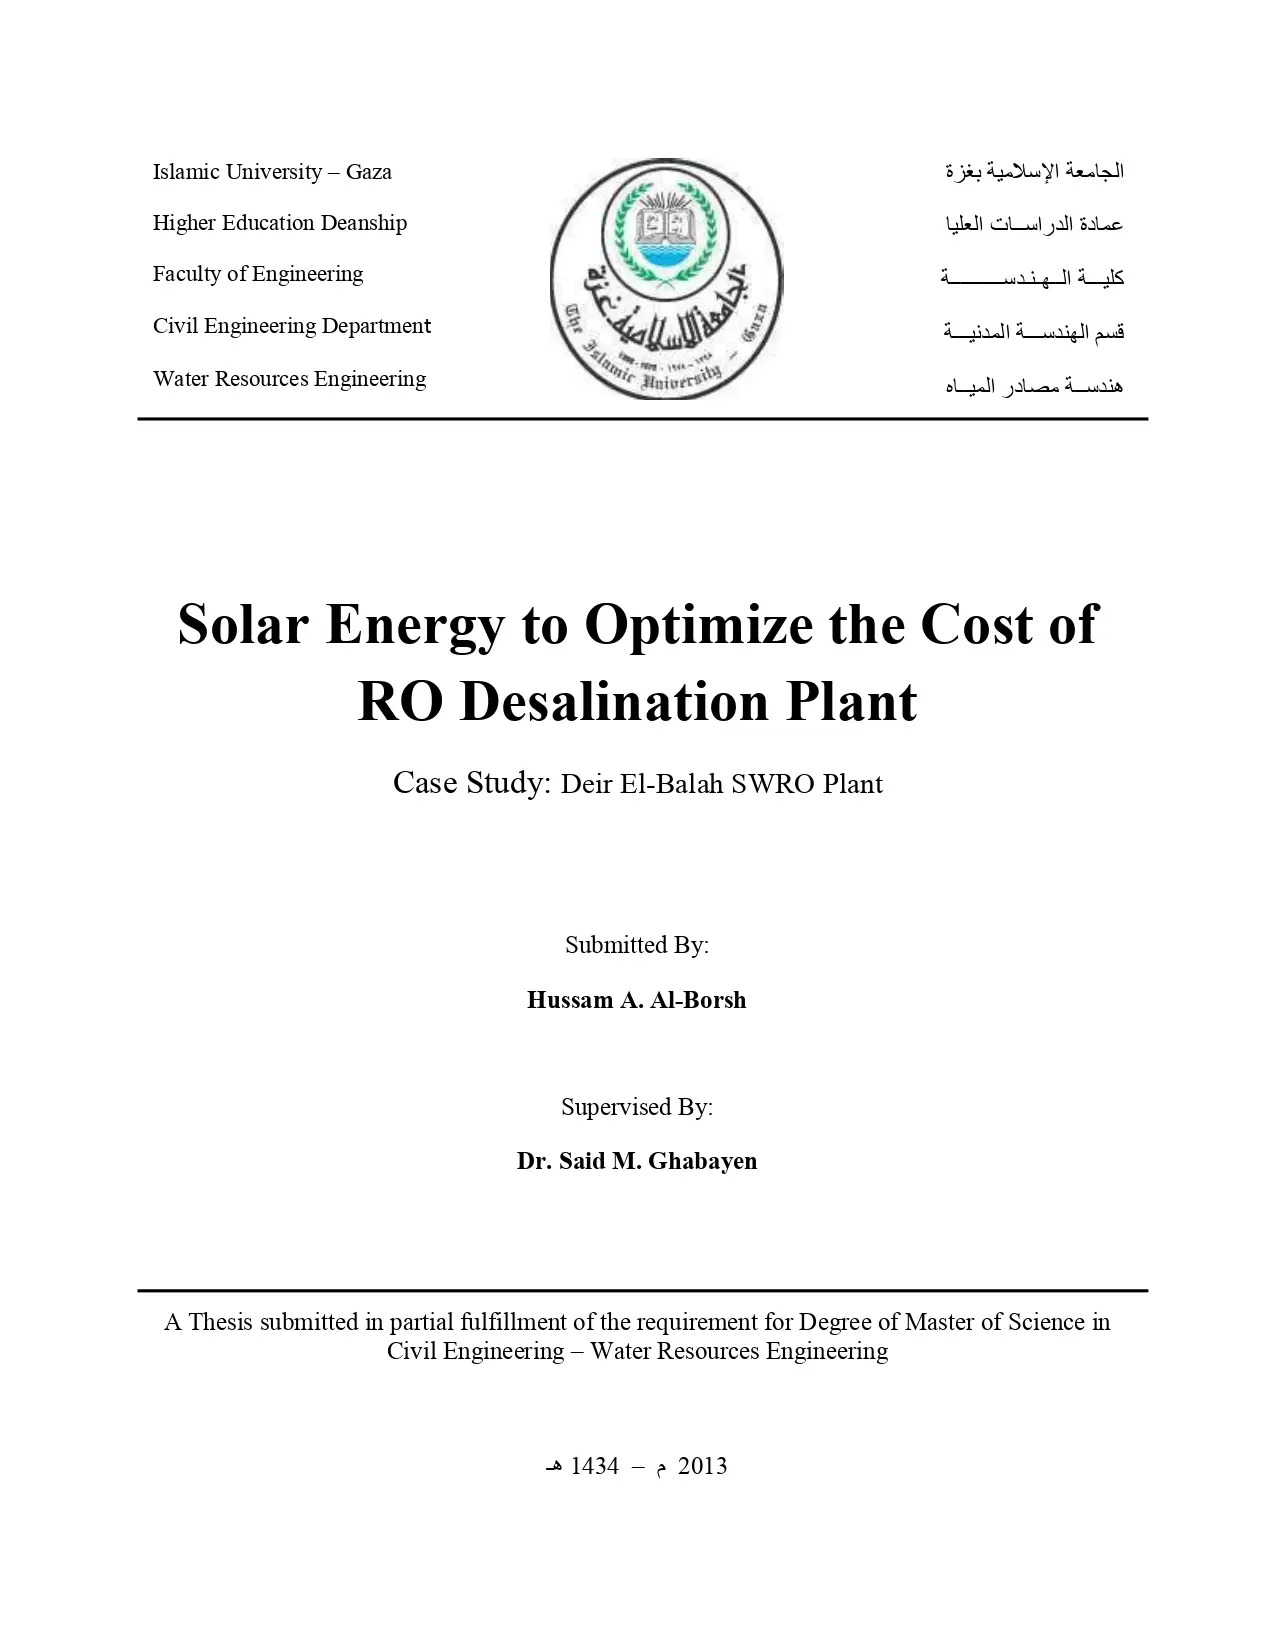 Solar Energy To Optimize The Cost Of RO Desalination Plant